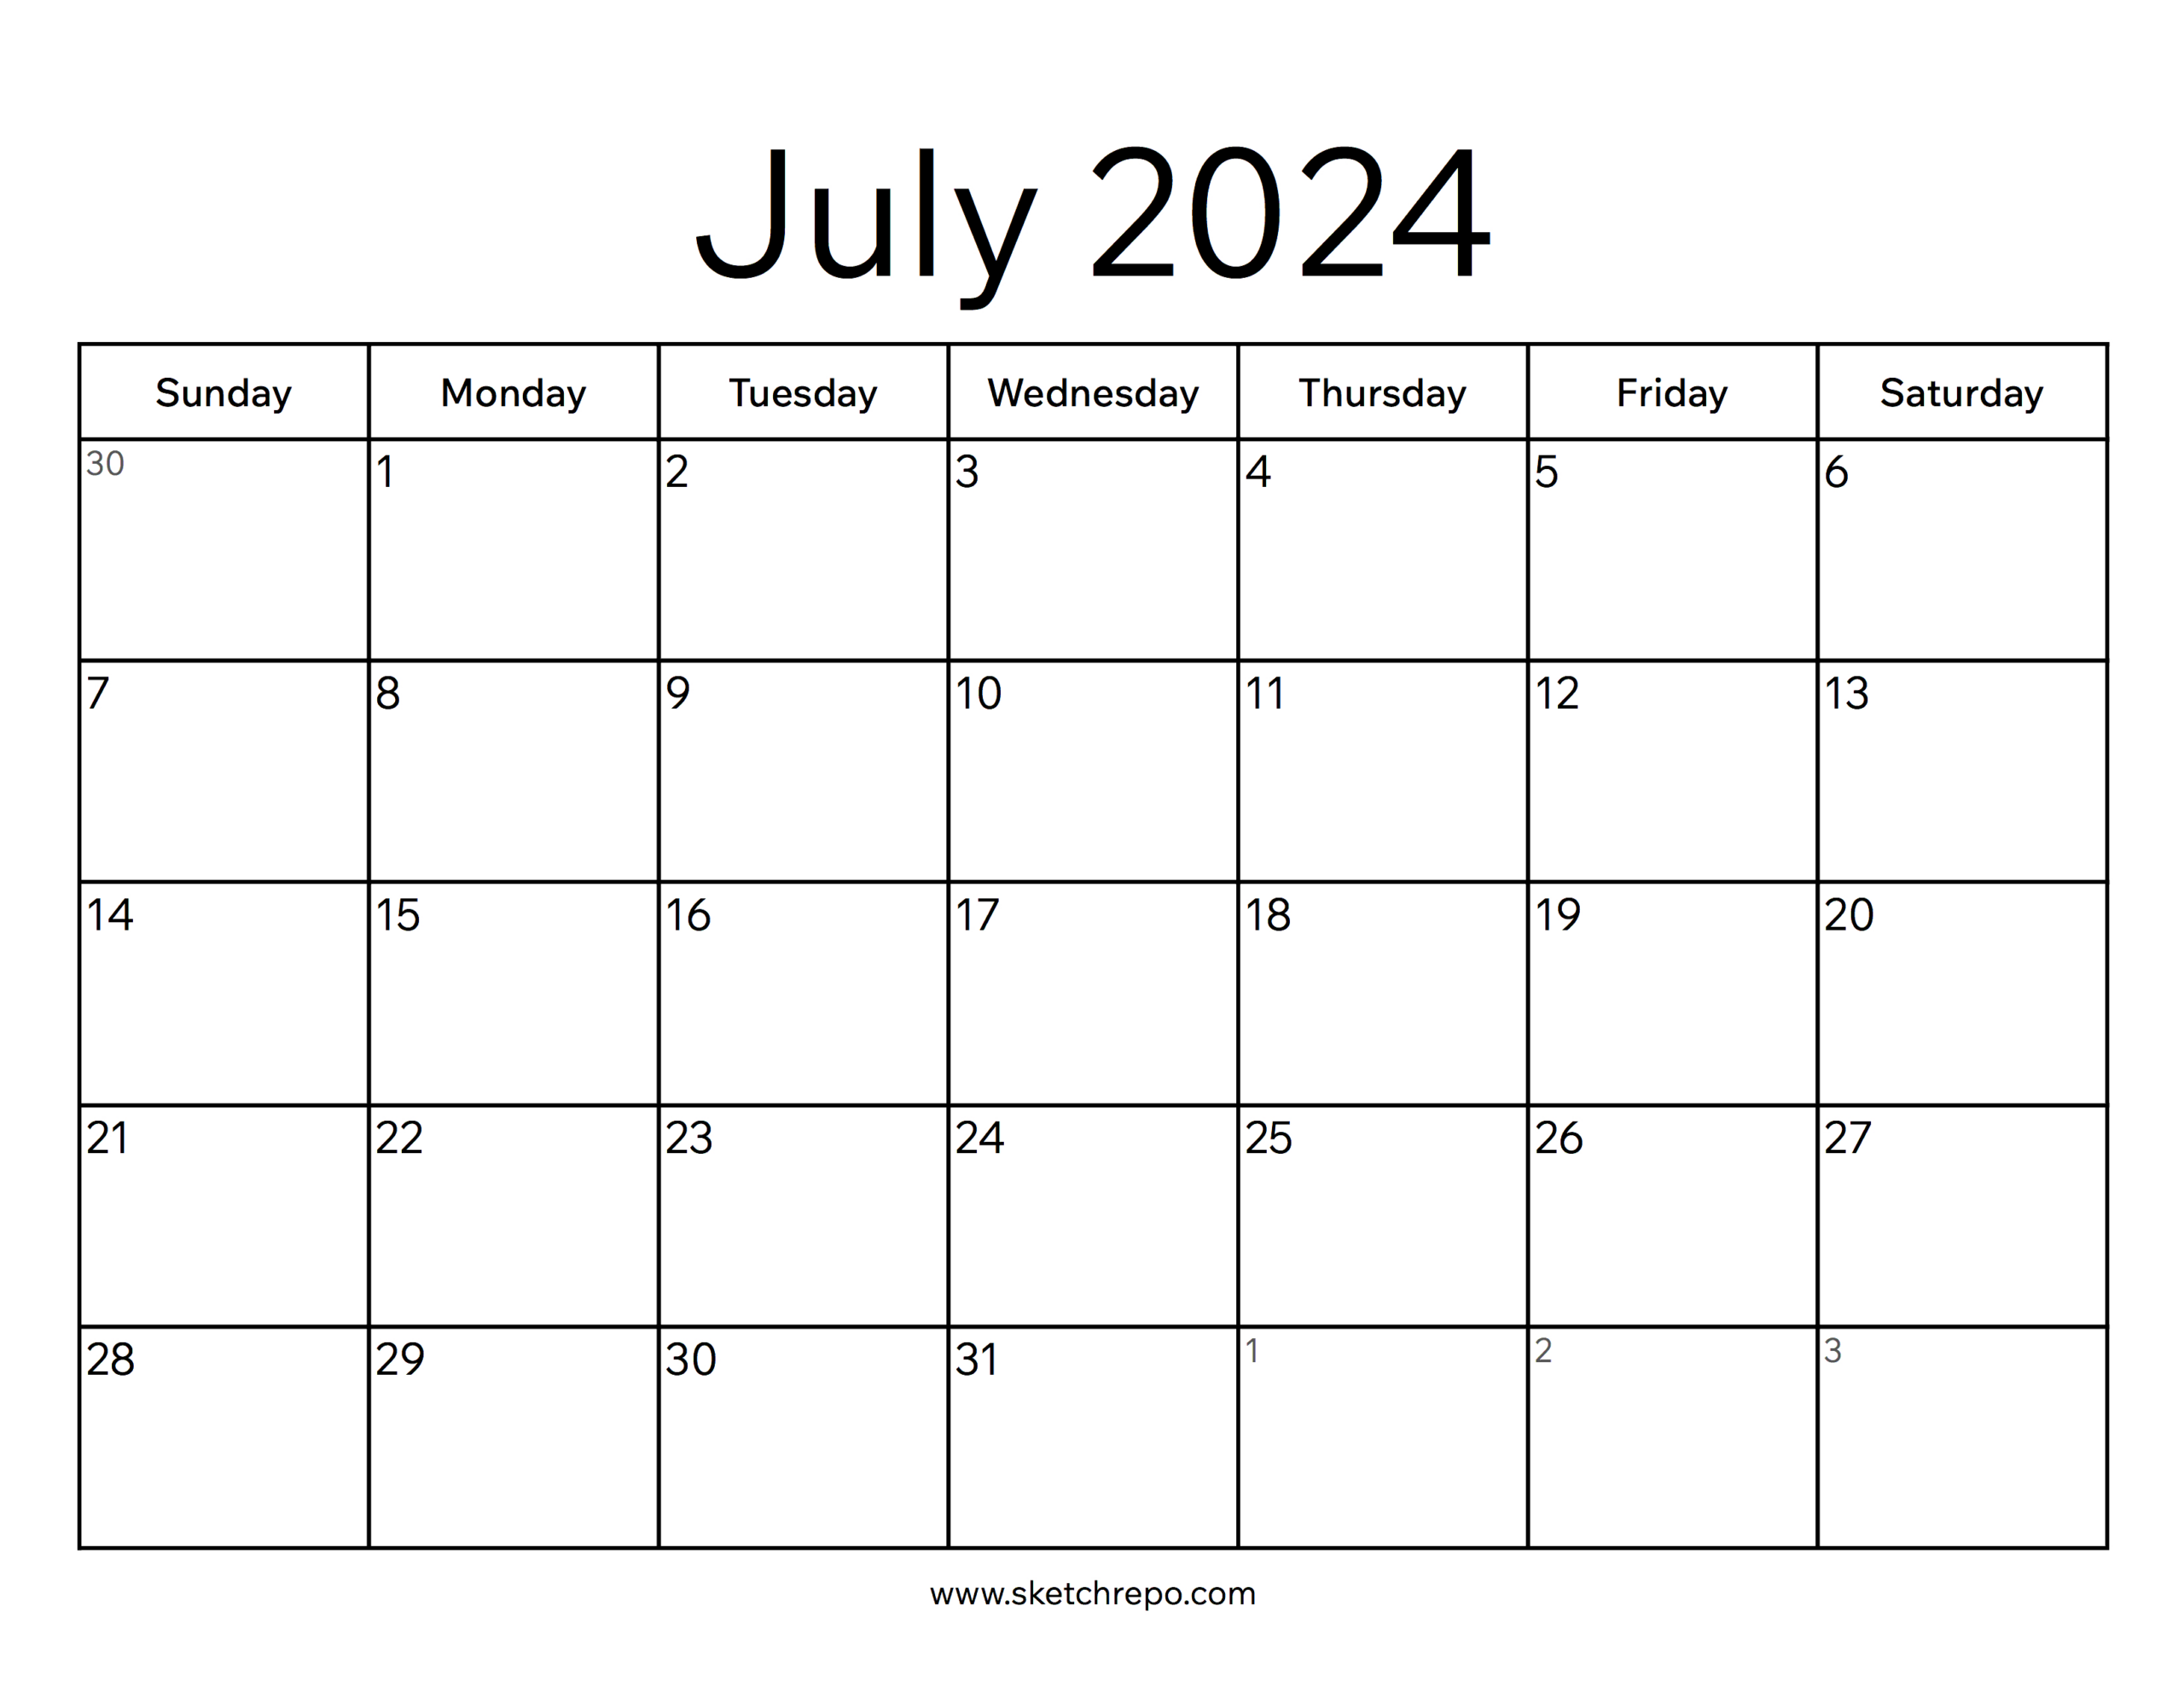 July 2024 Calendar – Sketch Repo | Picture Of A Calendar For July 2024